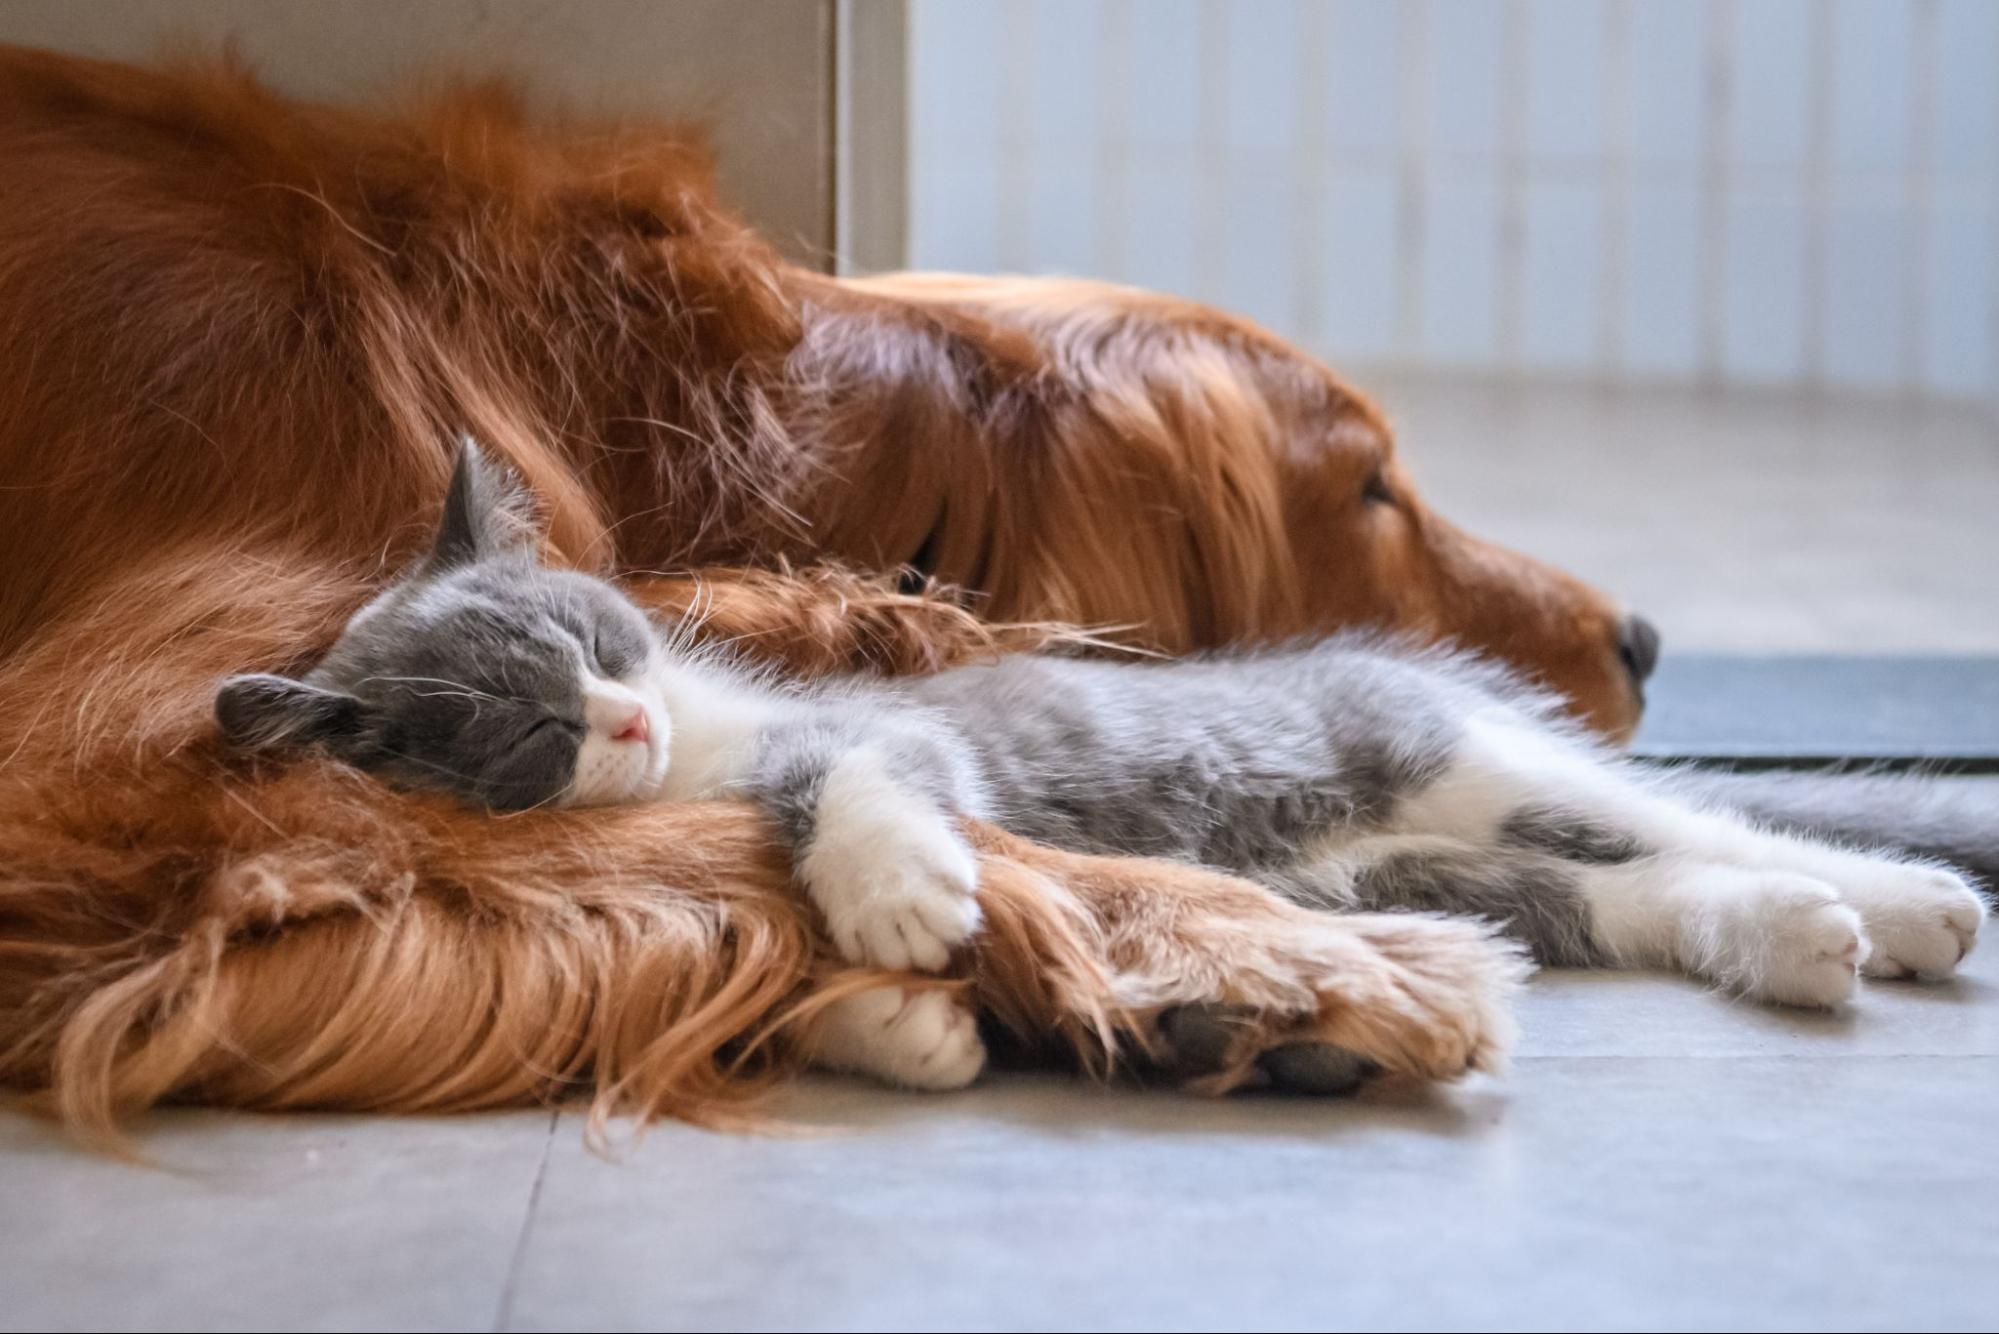 A small grey and white kitten lays on a brown golden retreiver